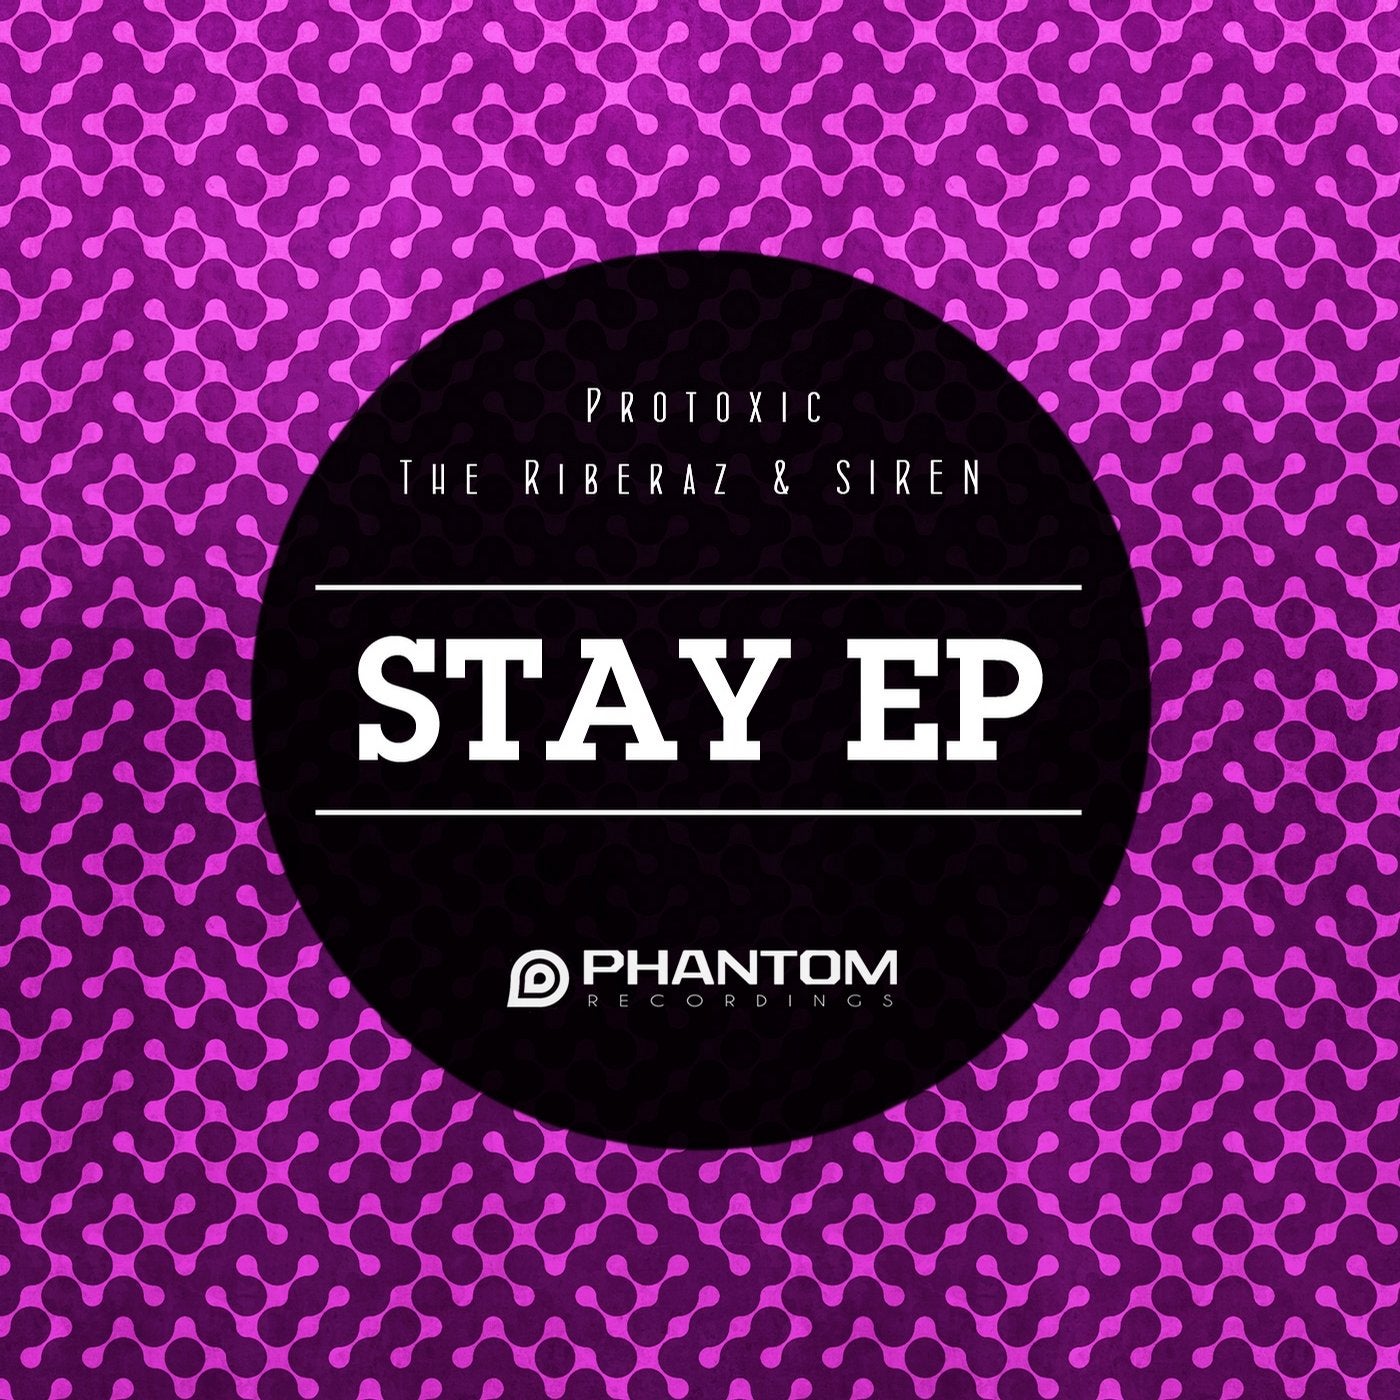 Stay EP (Part 2)